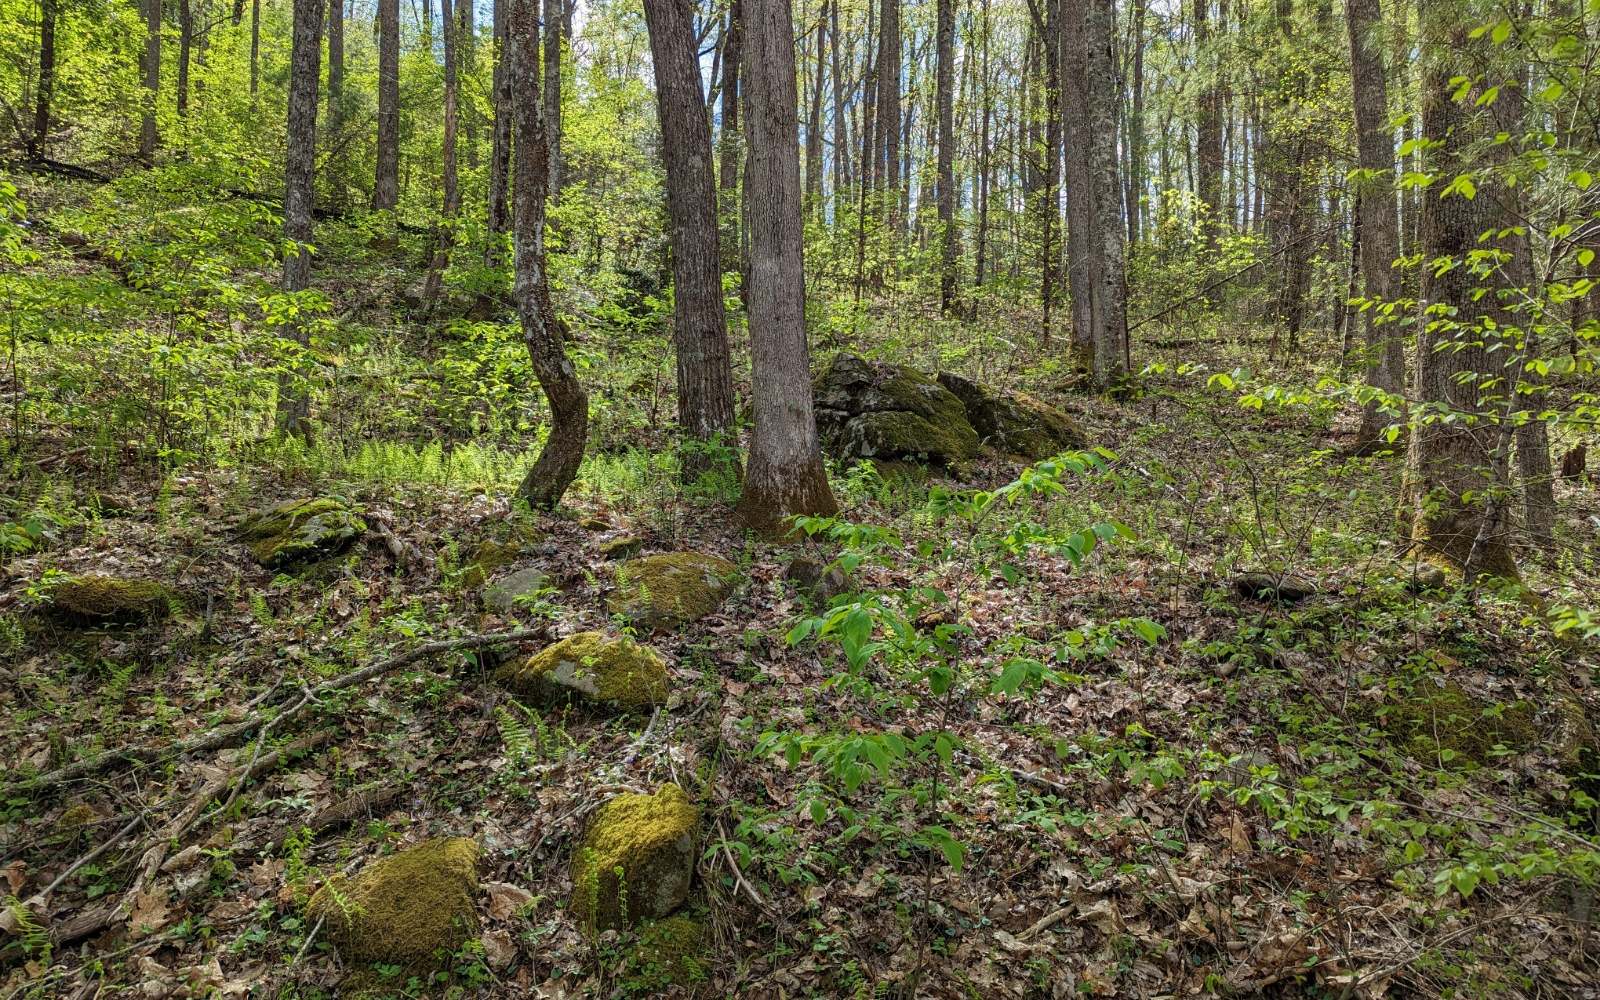 Located in the upscale Epworth area of Fannin County, this magnificent rural mountain lot is 3.88 rustic acres with mature hardwoods. Large outcroppings make several suitable house sites. Power and well available. Mountain views at top with vista pruning.